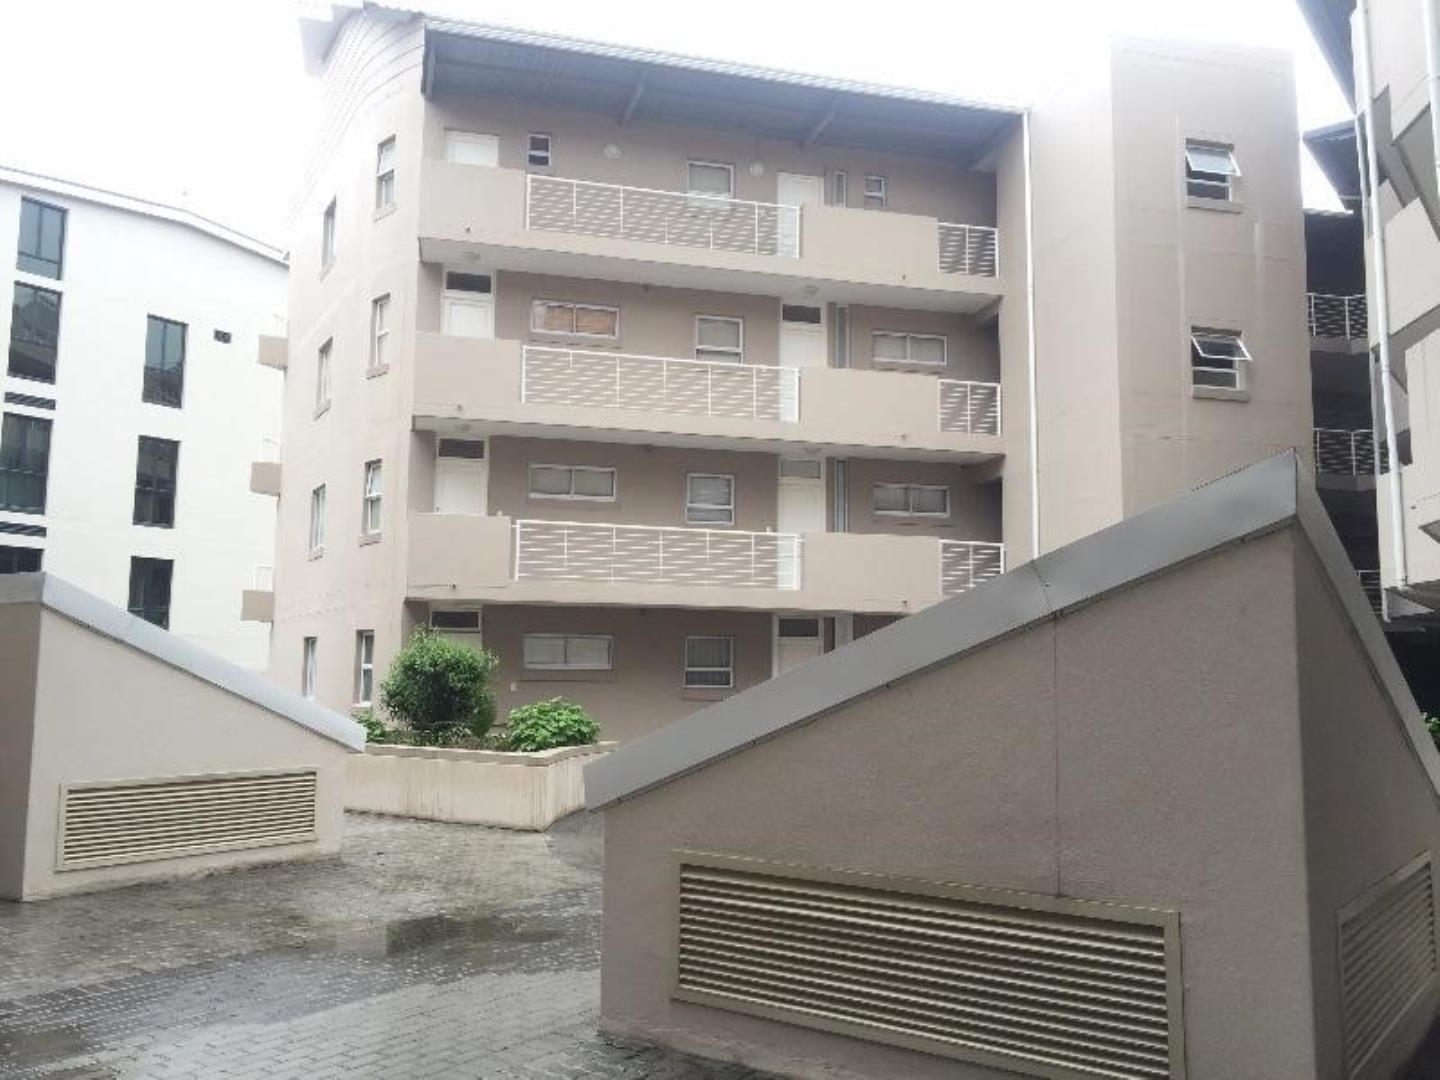 2 bedroom apartment at Tyger Waterfront, Bellville 